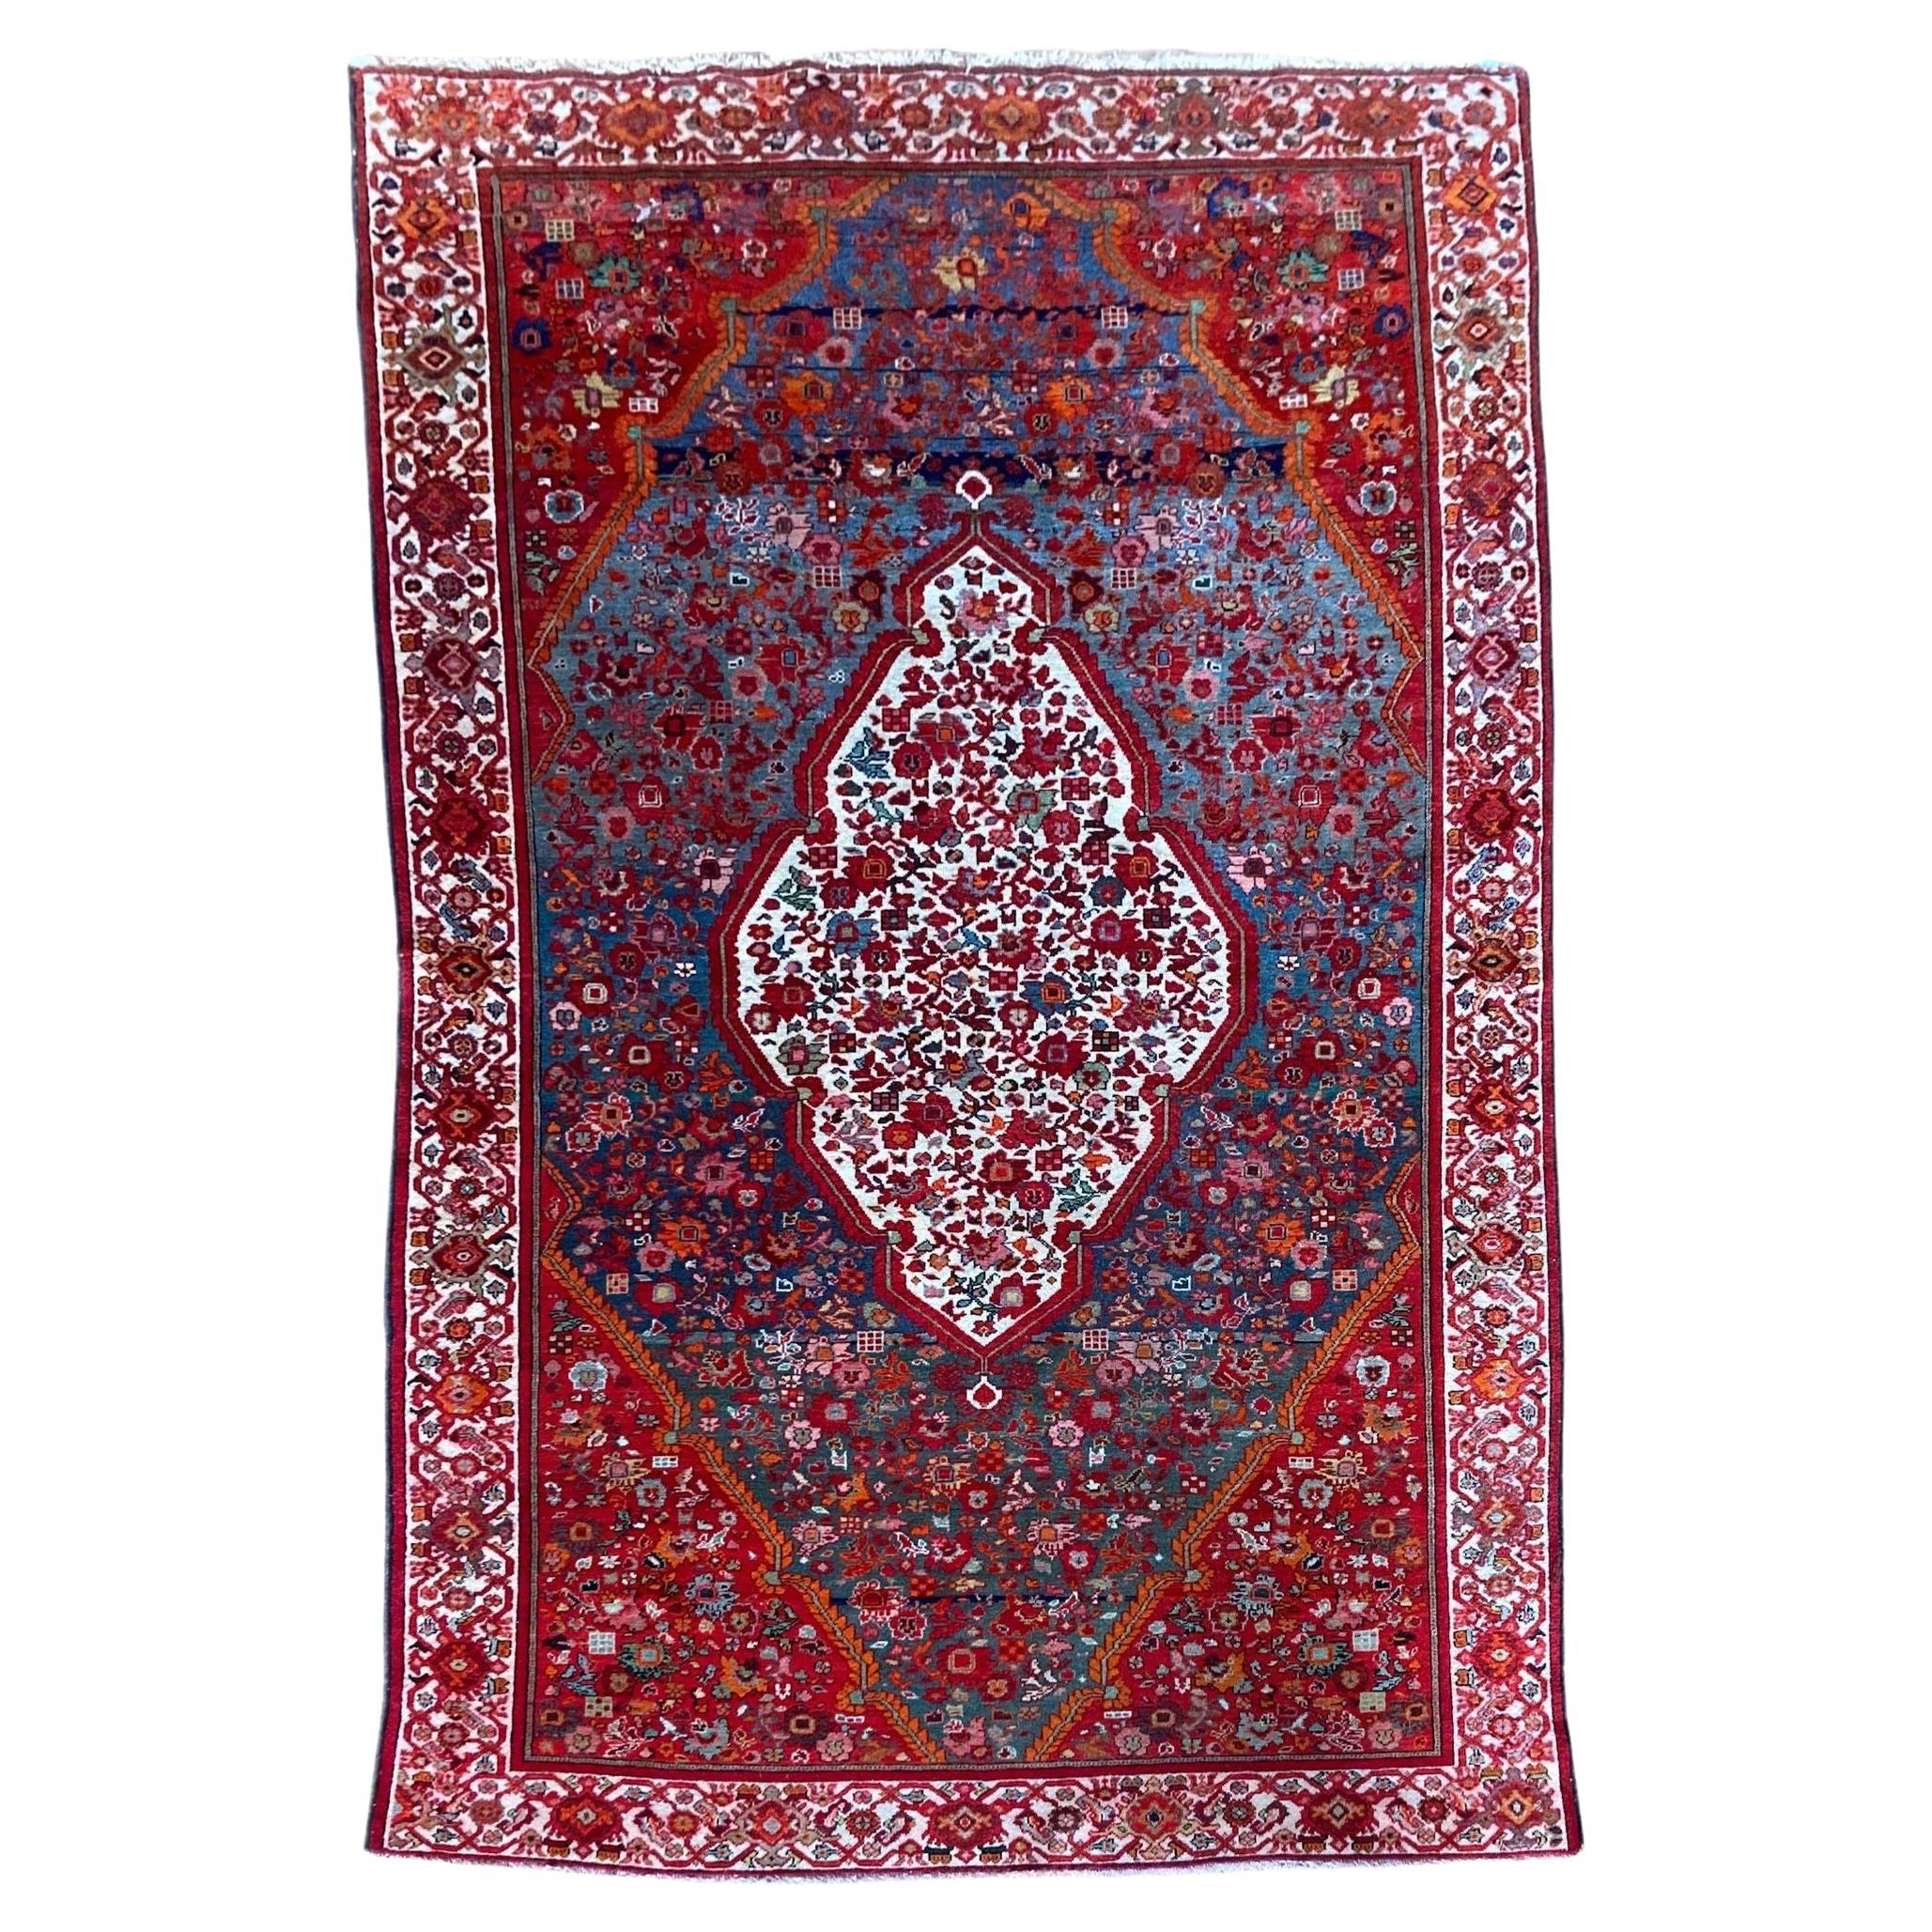 Antique Mishan Malayer Rug 1.98m x 1.32m For Sale